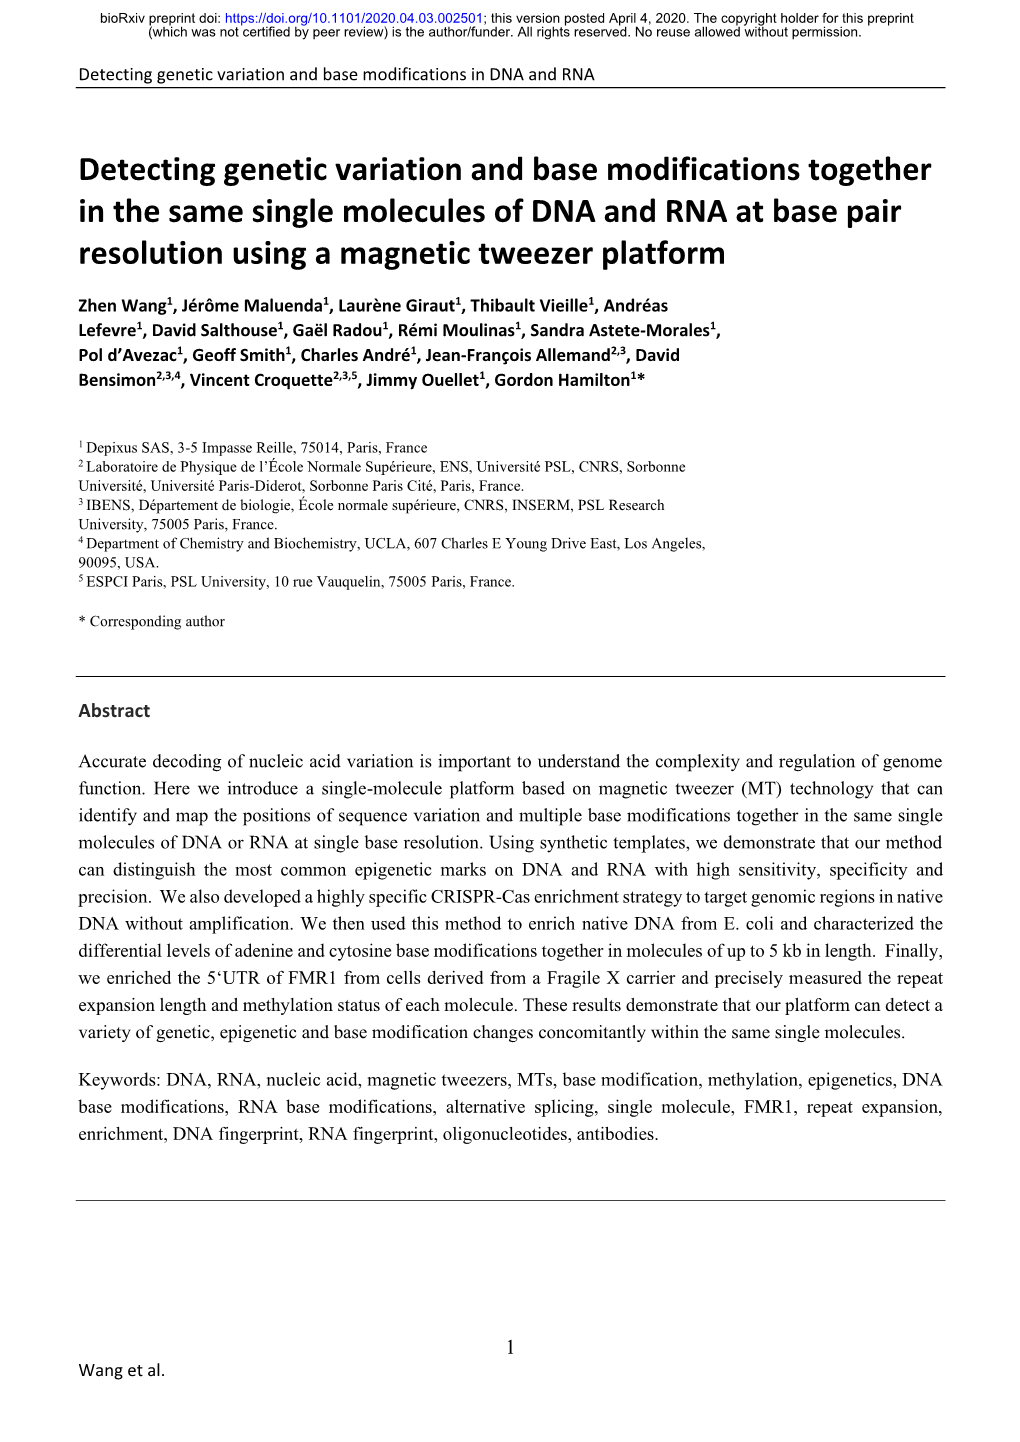 Detecting Genetic Variation and Base Modifications Together in the Same Single Molecules of DNA and RNA at Base Pair Resolution Using a Magnetic Tweezer Platform